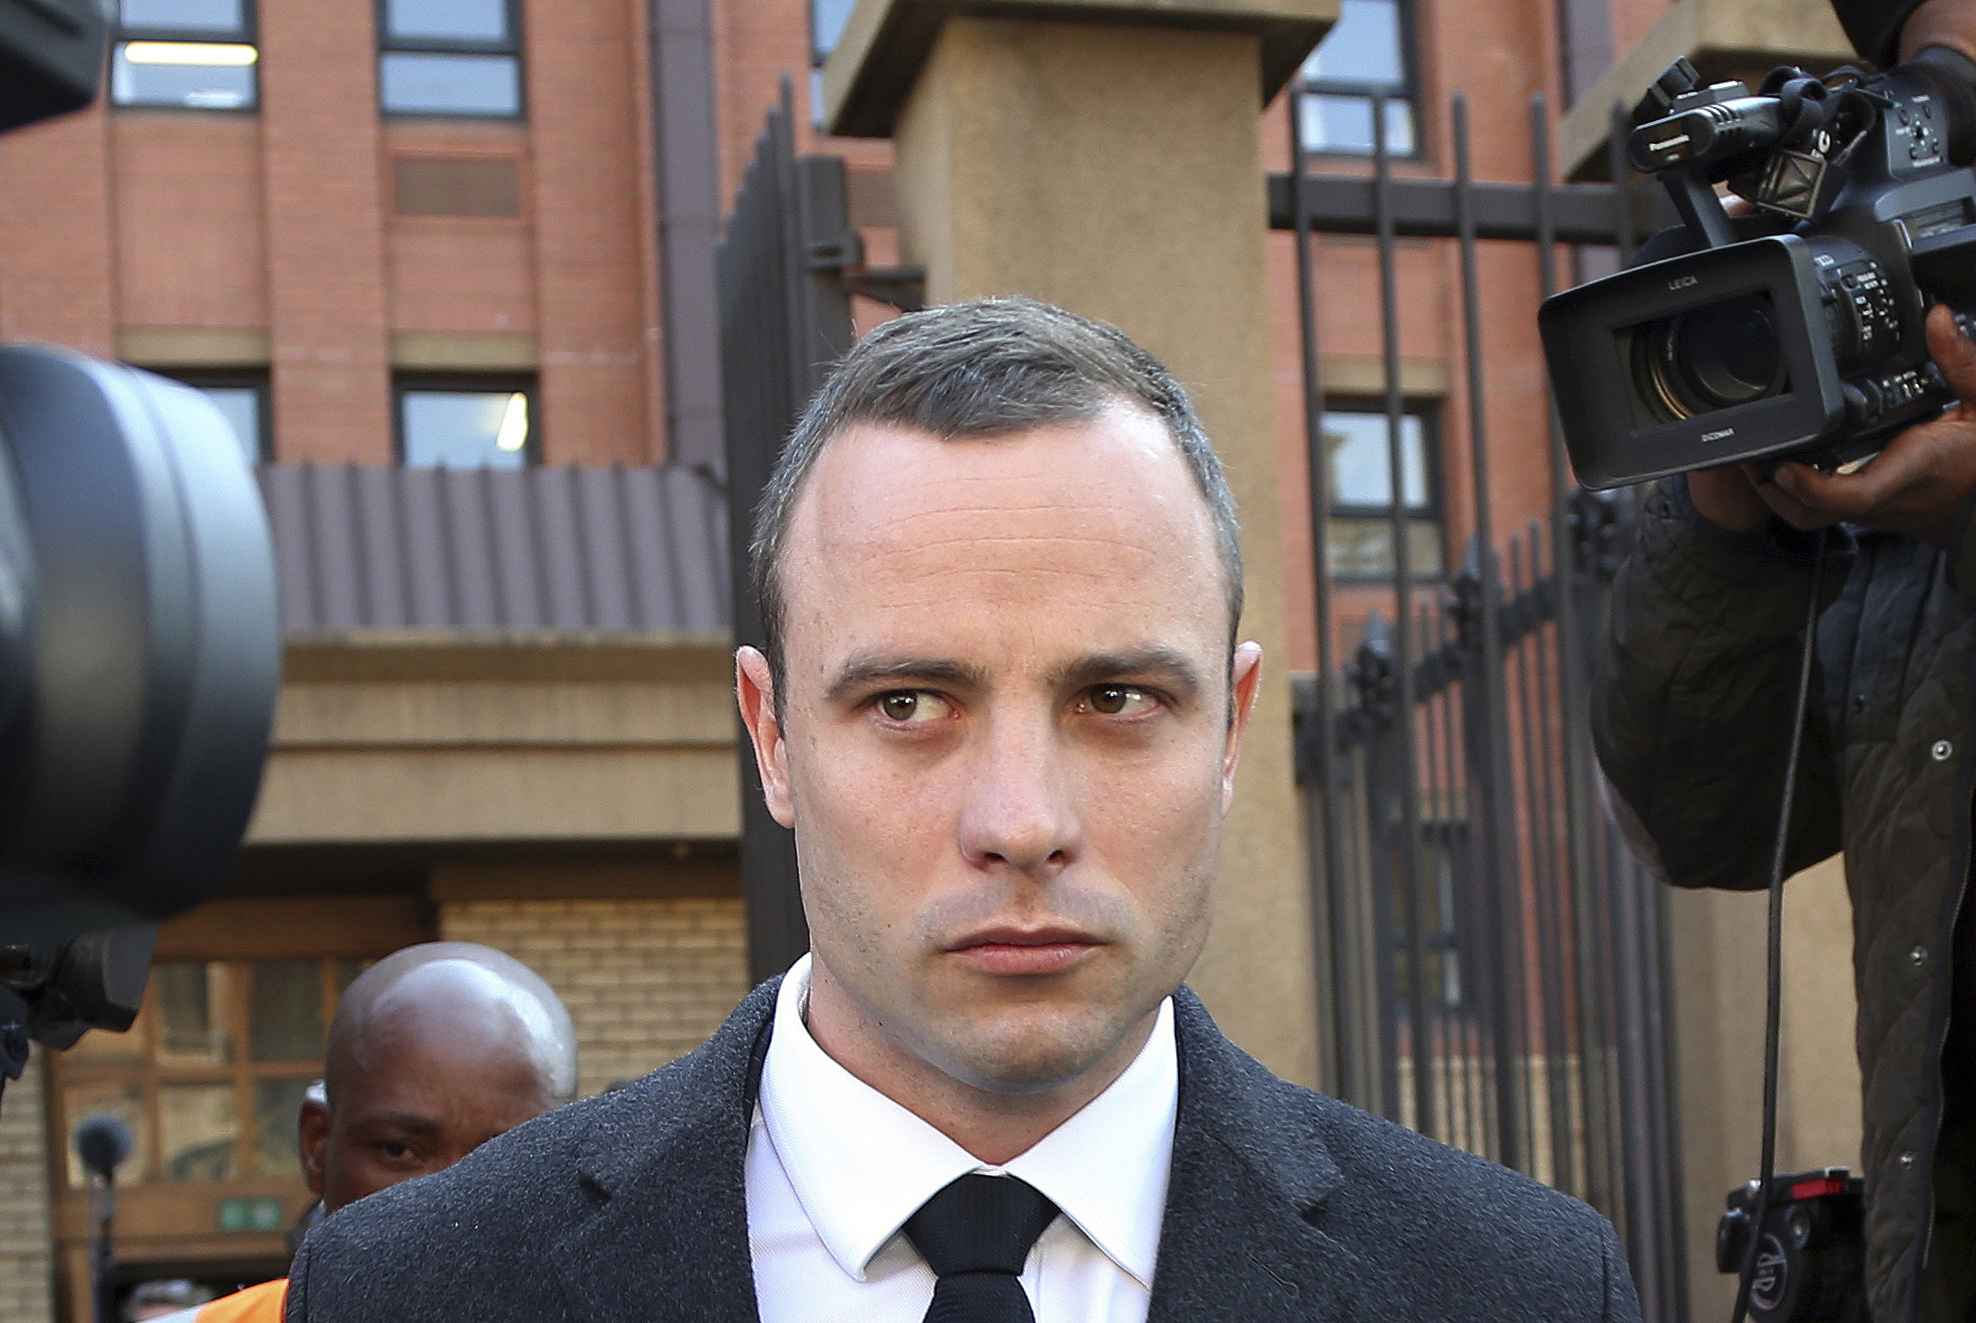 PHOTO: Oscar Pistorius leaves the high court in Pretoria, South Africa on May 20, 2014.